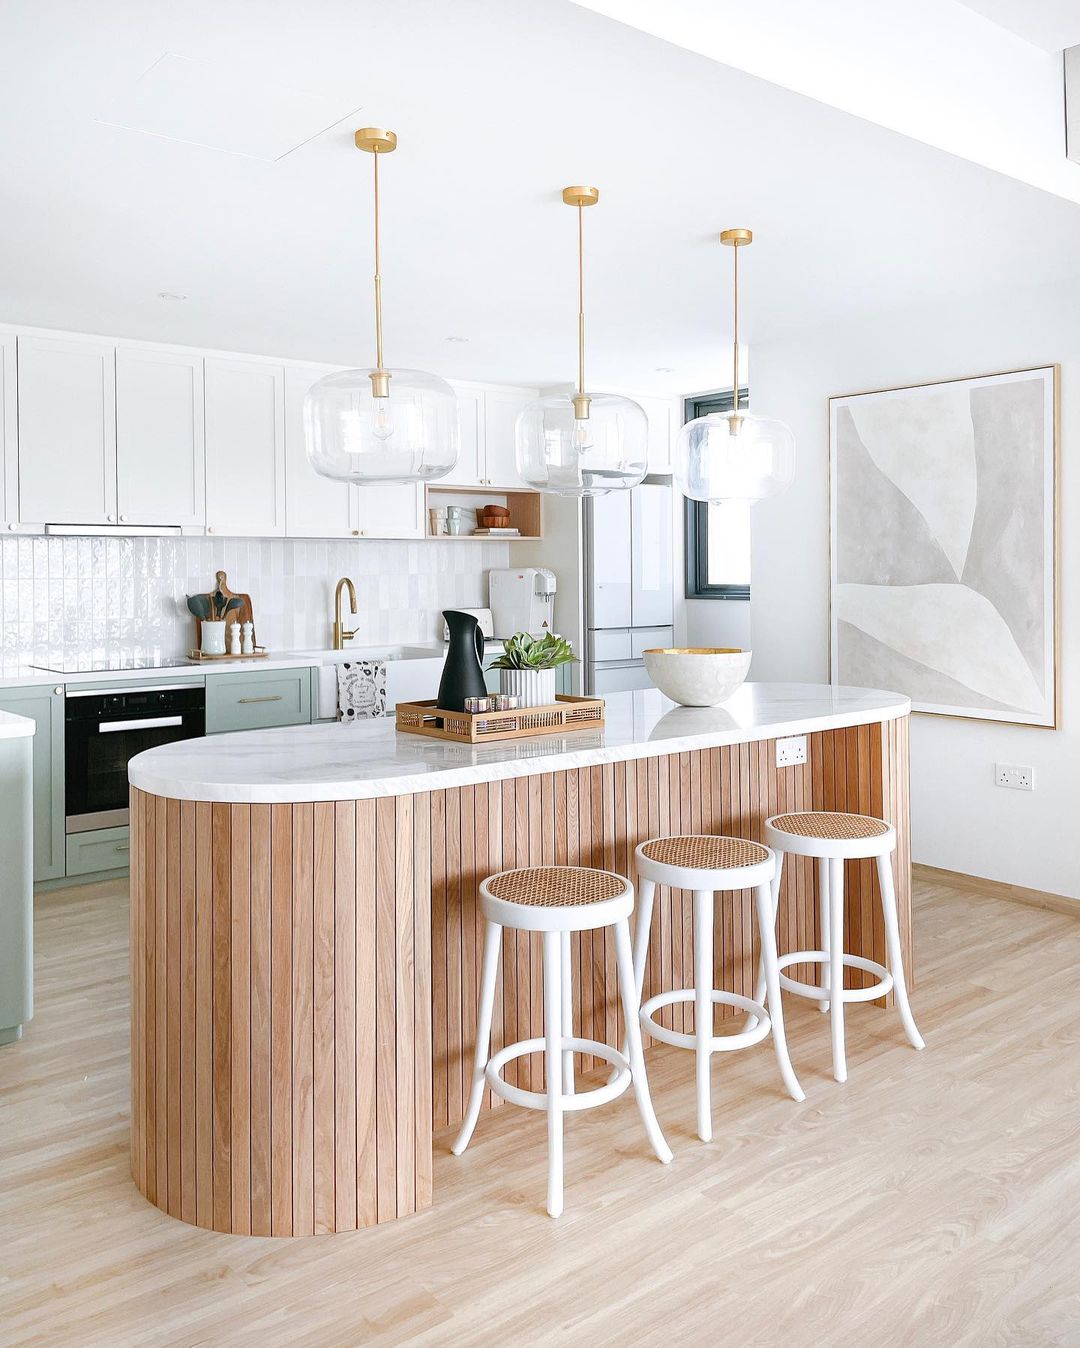 Beautiful open kitchen design with Scandinavian style. Photo by Instagram User @houseofchais